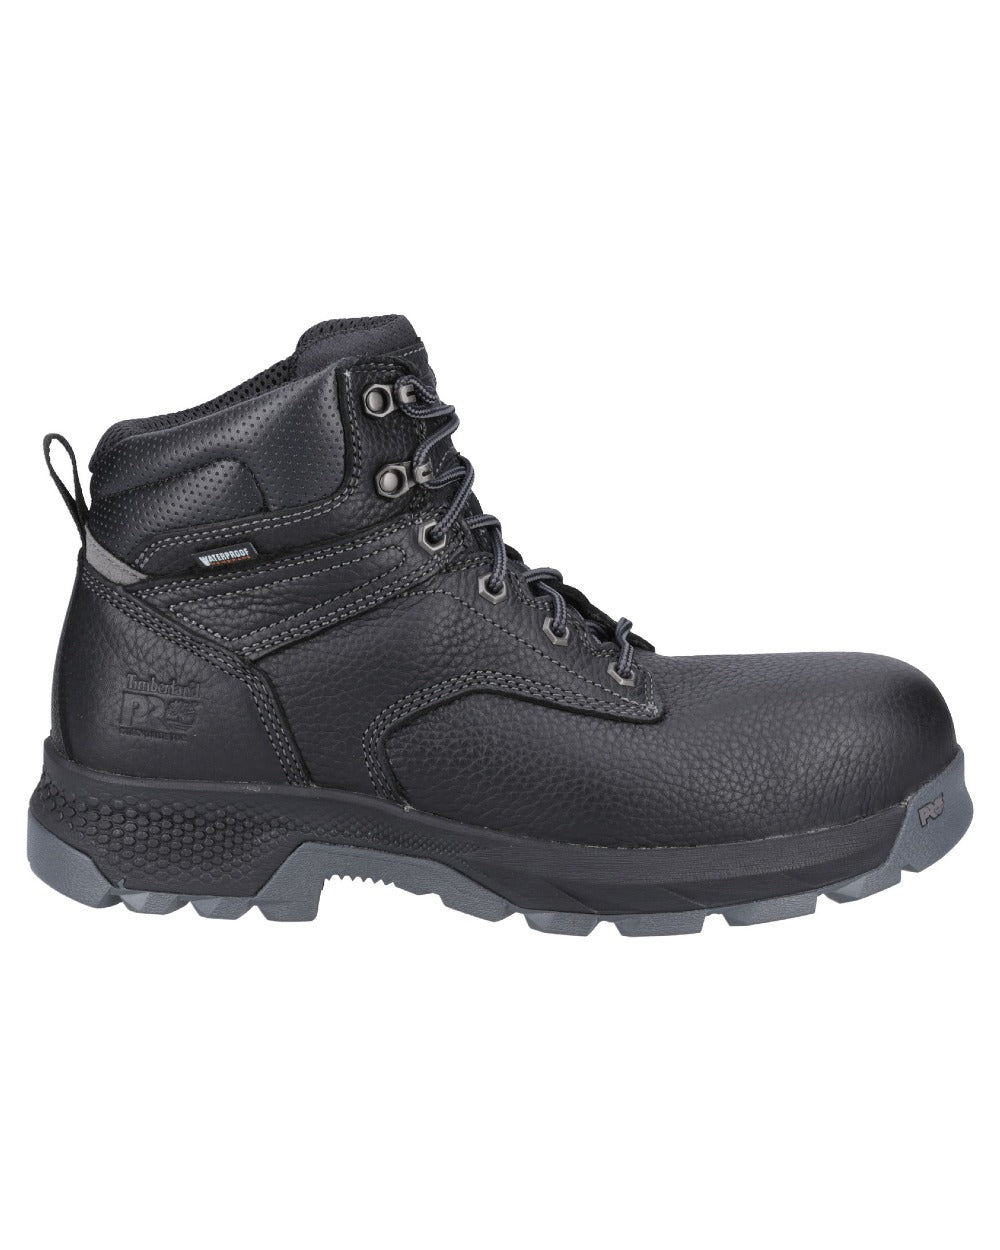 Black coloured Timberland Pro Titan 6inch Safety Boots on white background 